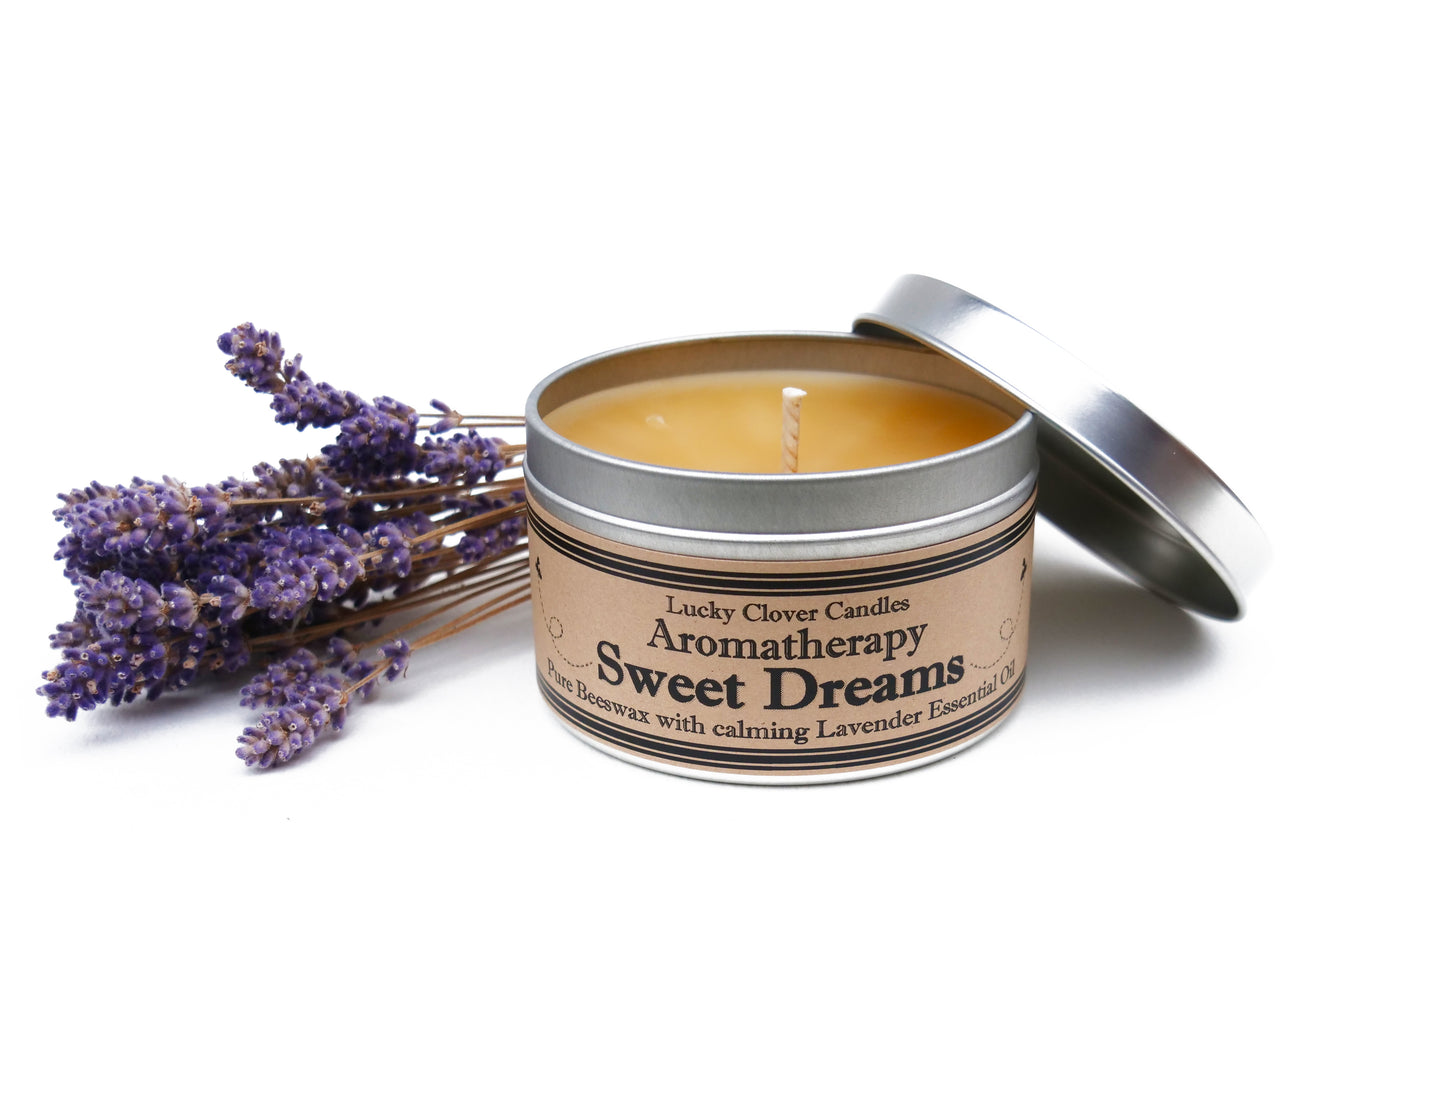 Sweet Dreams Aromatherapy Beeswax Candle - 8 oz